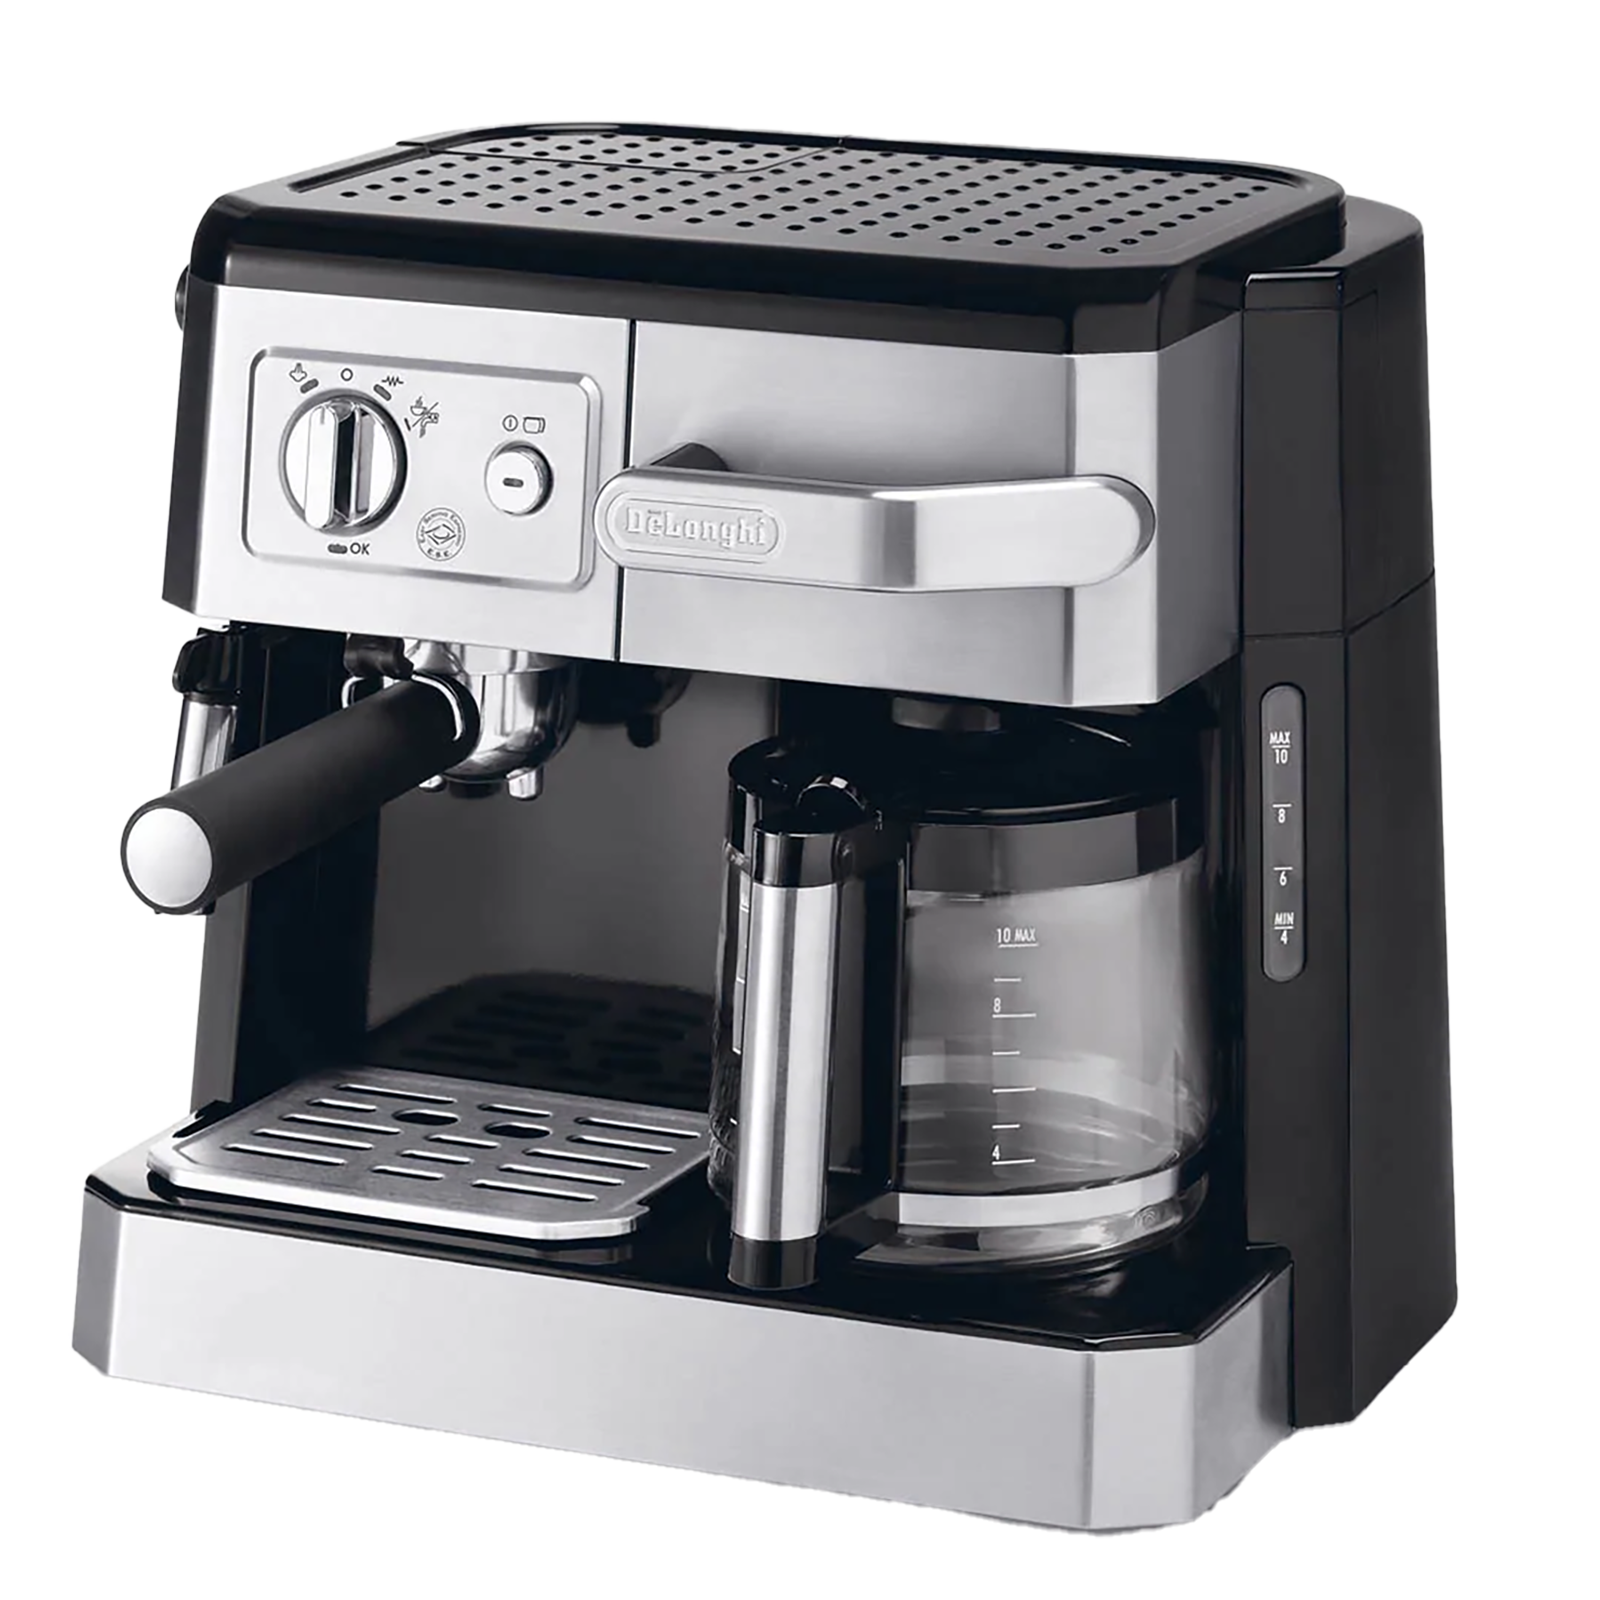 DeLonghi 4 Cups Semi-Automatic Coffee Maker (Makes Expresso and Filter Coffee, BCO420, Black)_1